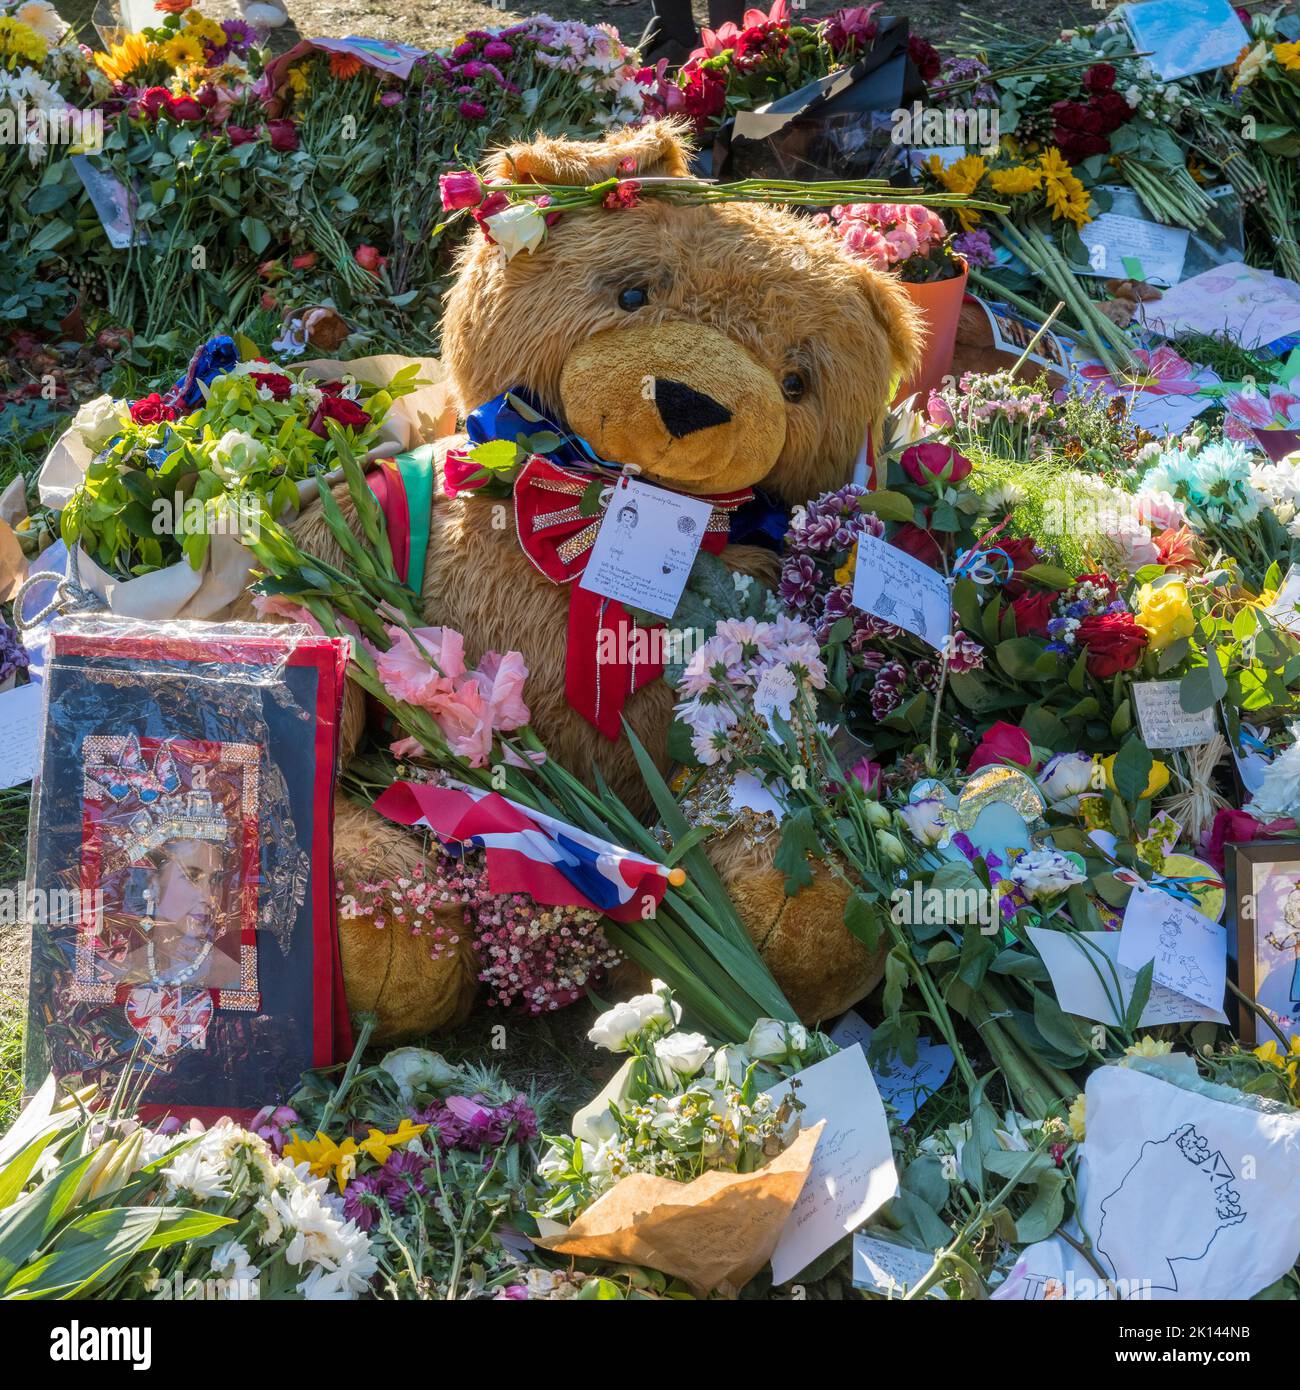 Vast quantities of flowers and floral tributes have been left in Green Park, central London, by thousands of visitors mourning the death of Queen Elizabeth II Stock Photo